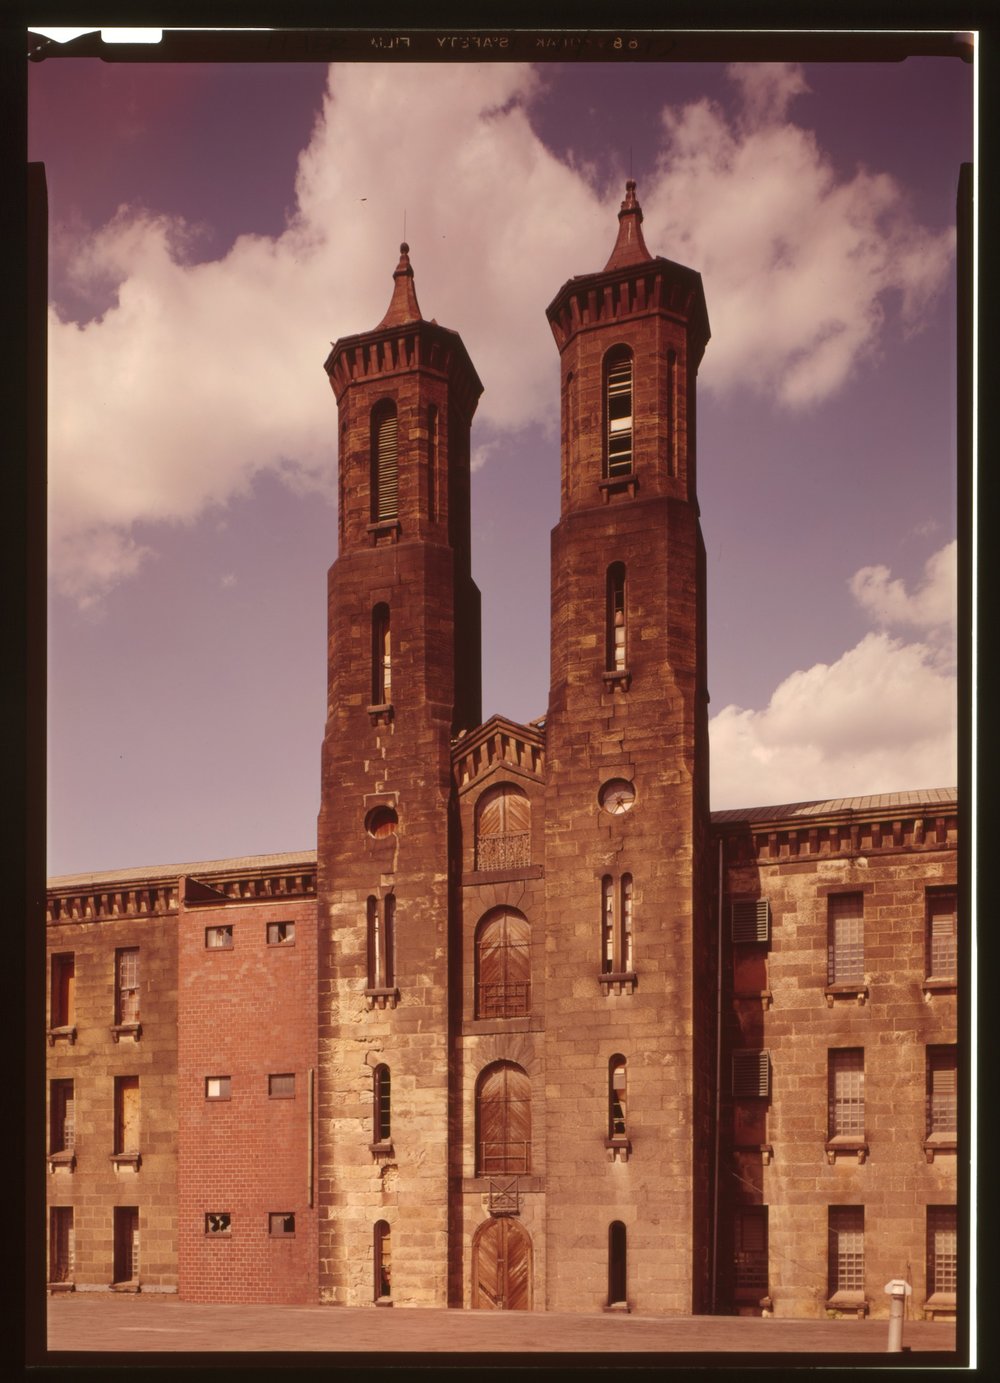  Cannelton Cotton Mill, Front &amp; Fourth Streets, Cannelton, Perry County, Ind. (n.d.) Image via Library of Congress. 